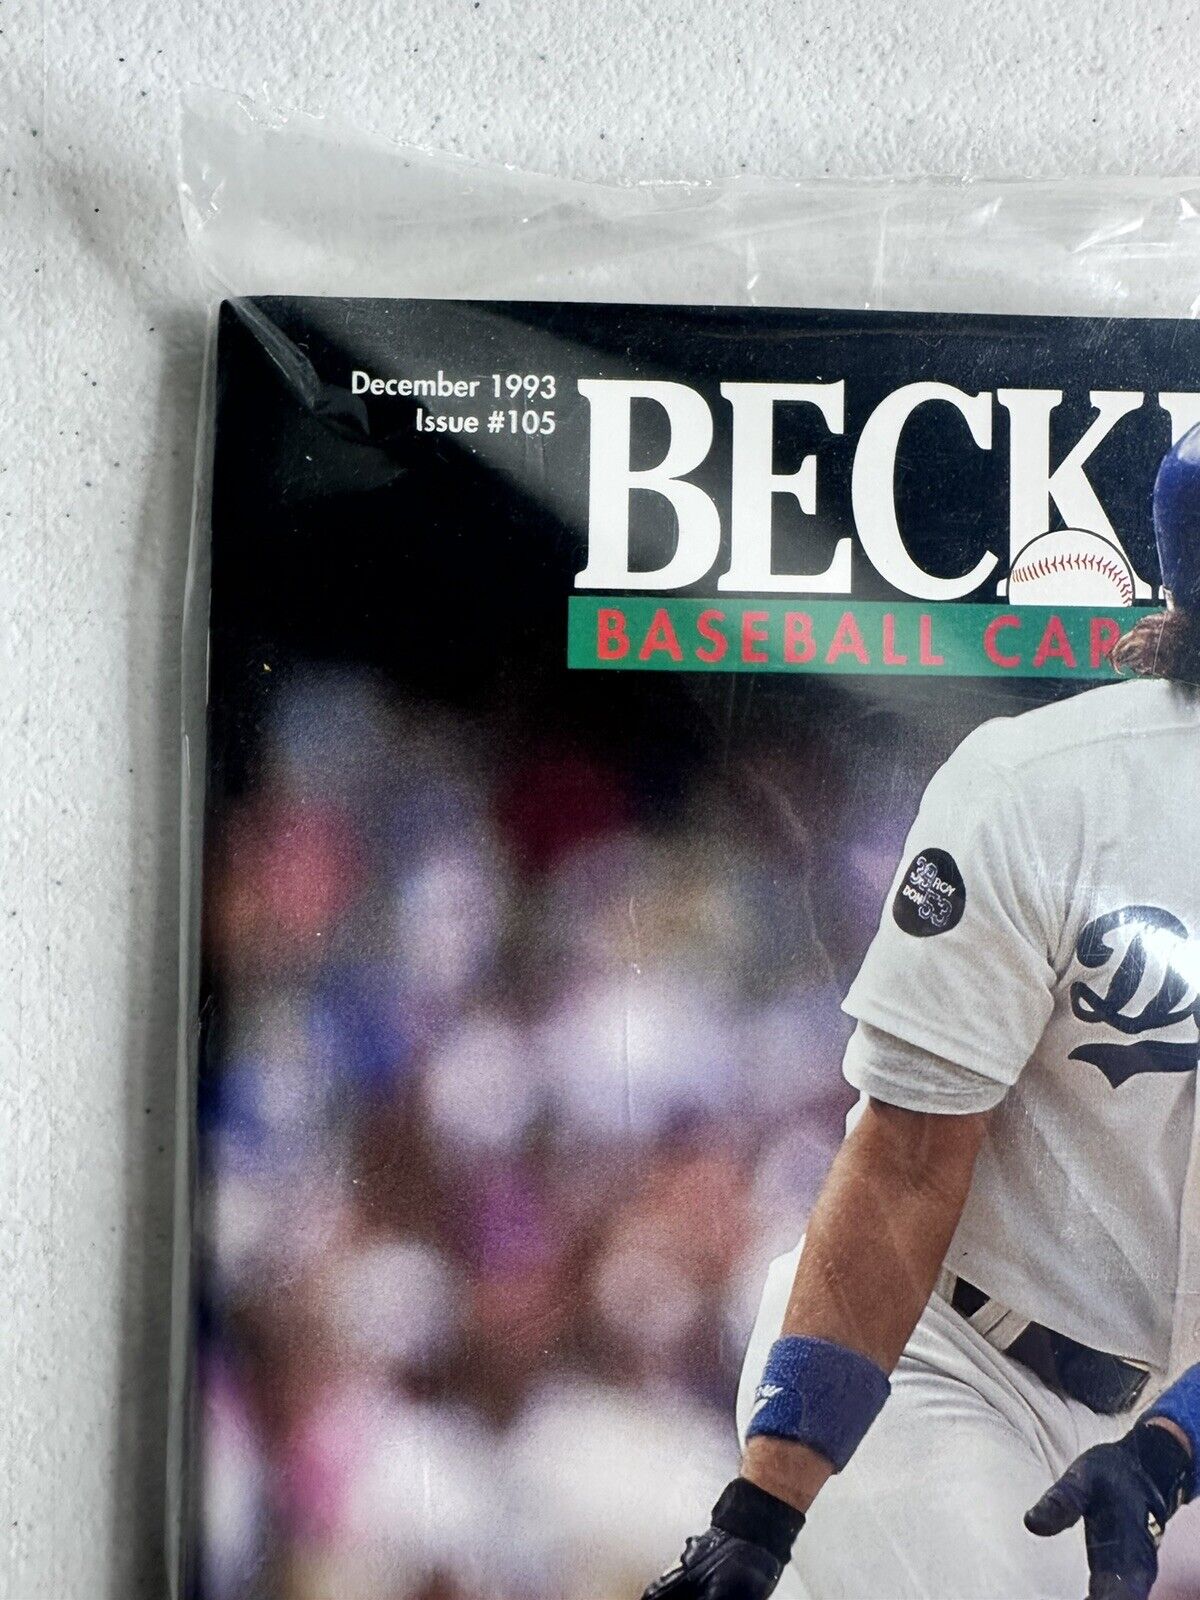 Sealed New Beckett Baseball Magazine - Mike Piazza December 1993 Dodgers Issue - Collectible Sports Memorabilia - TreasuTiques